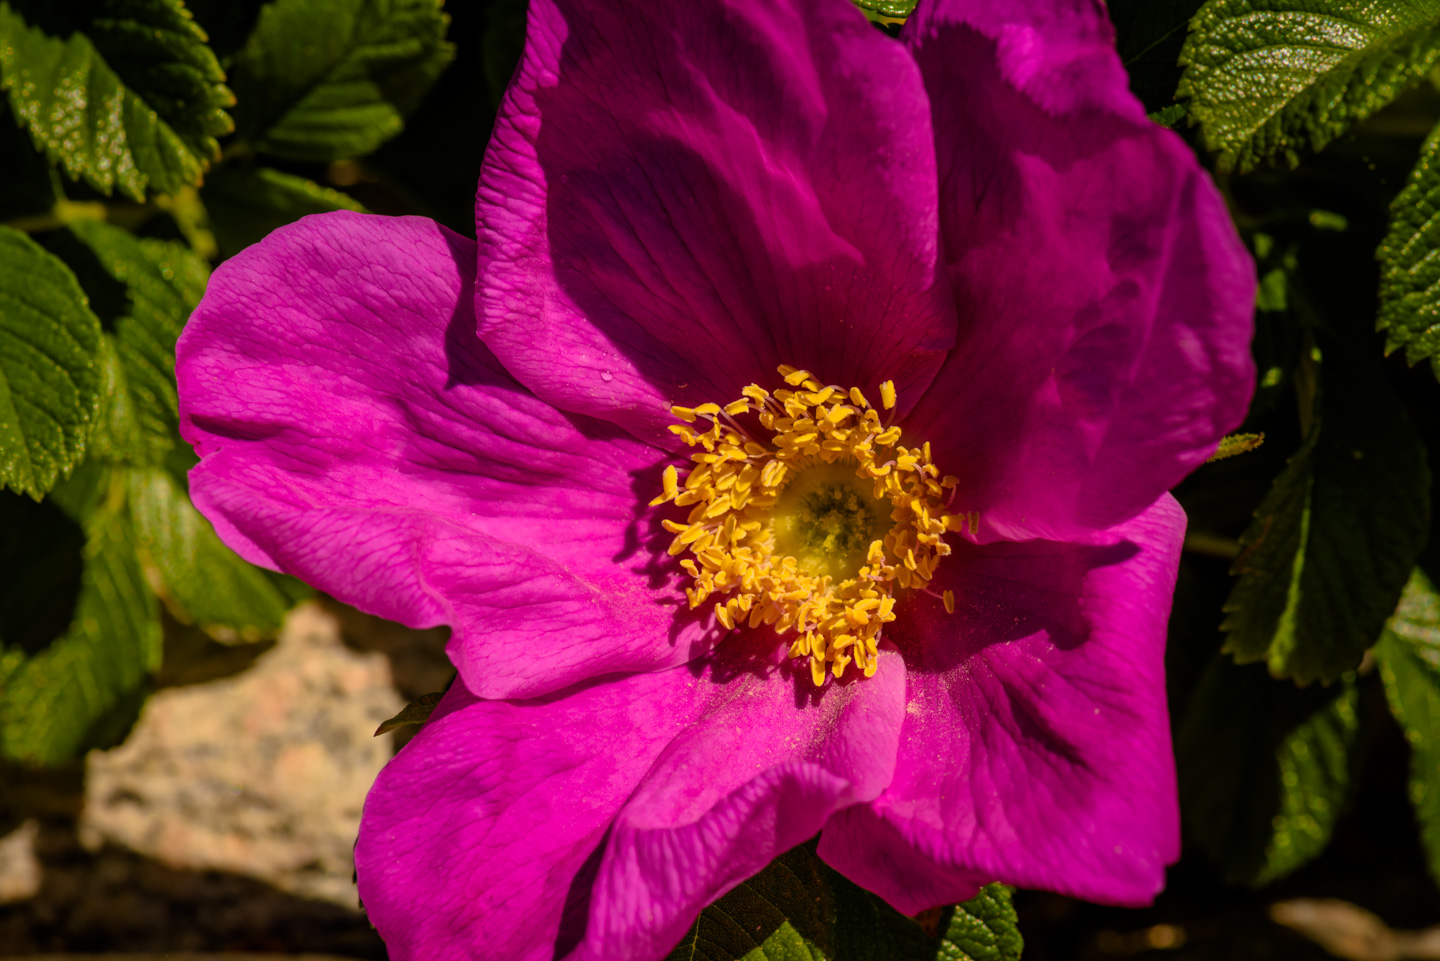 close-up image of a rugosa rose flower